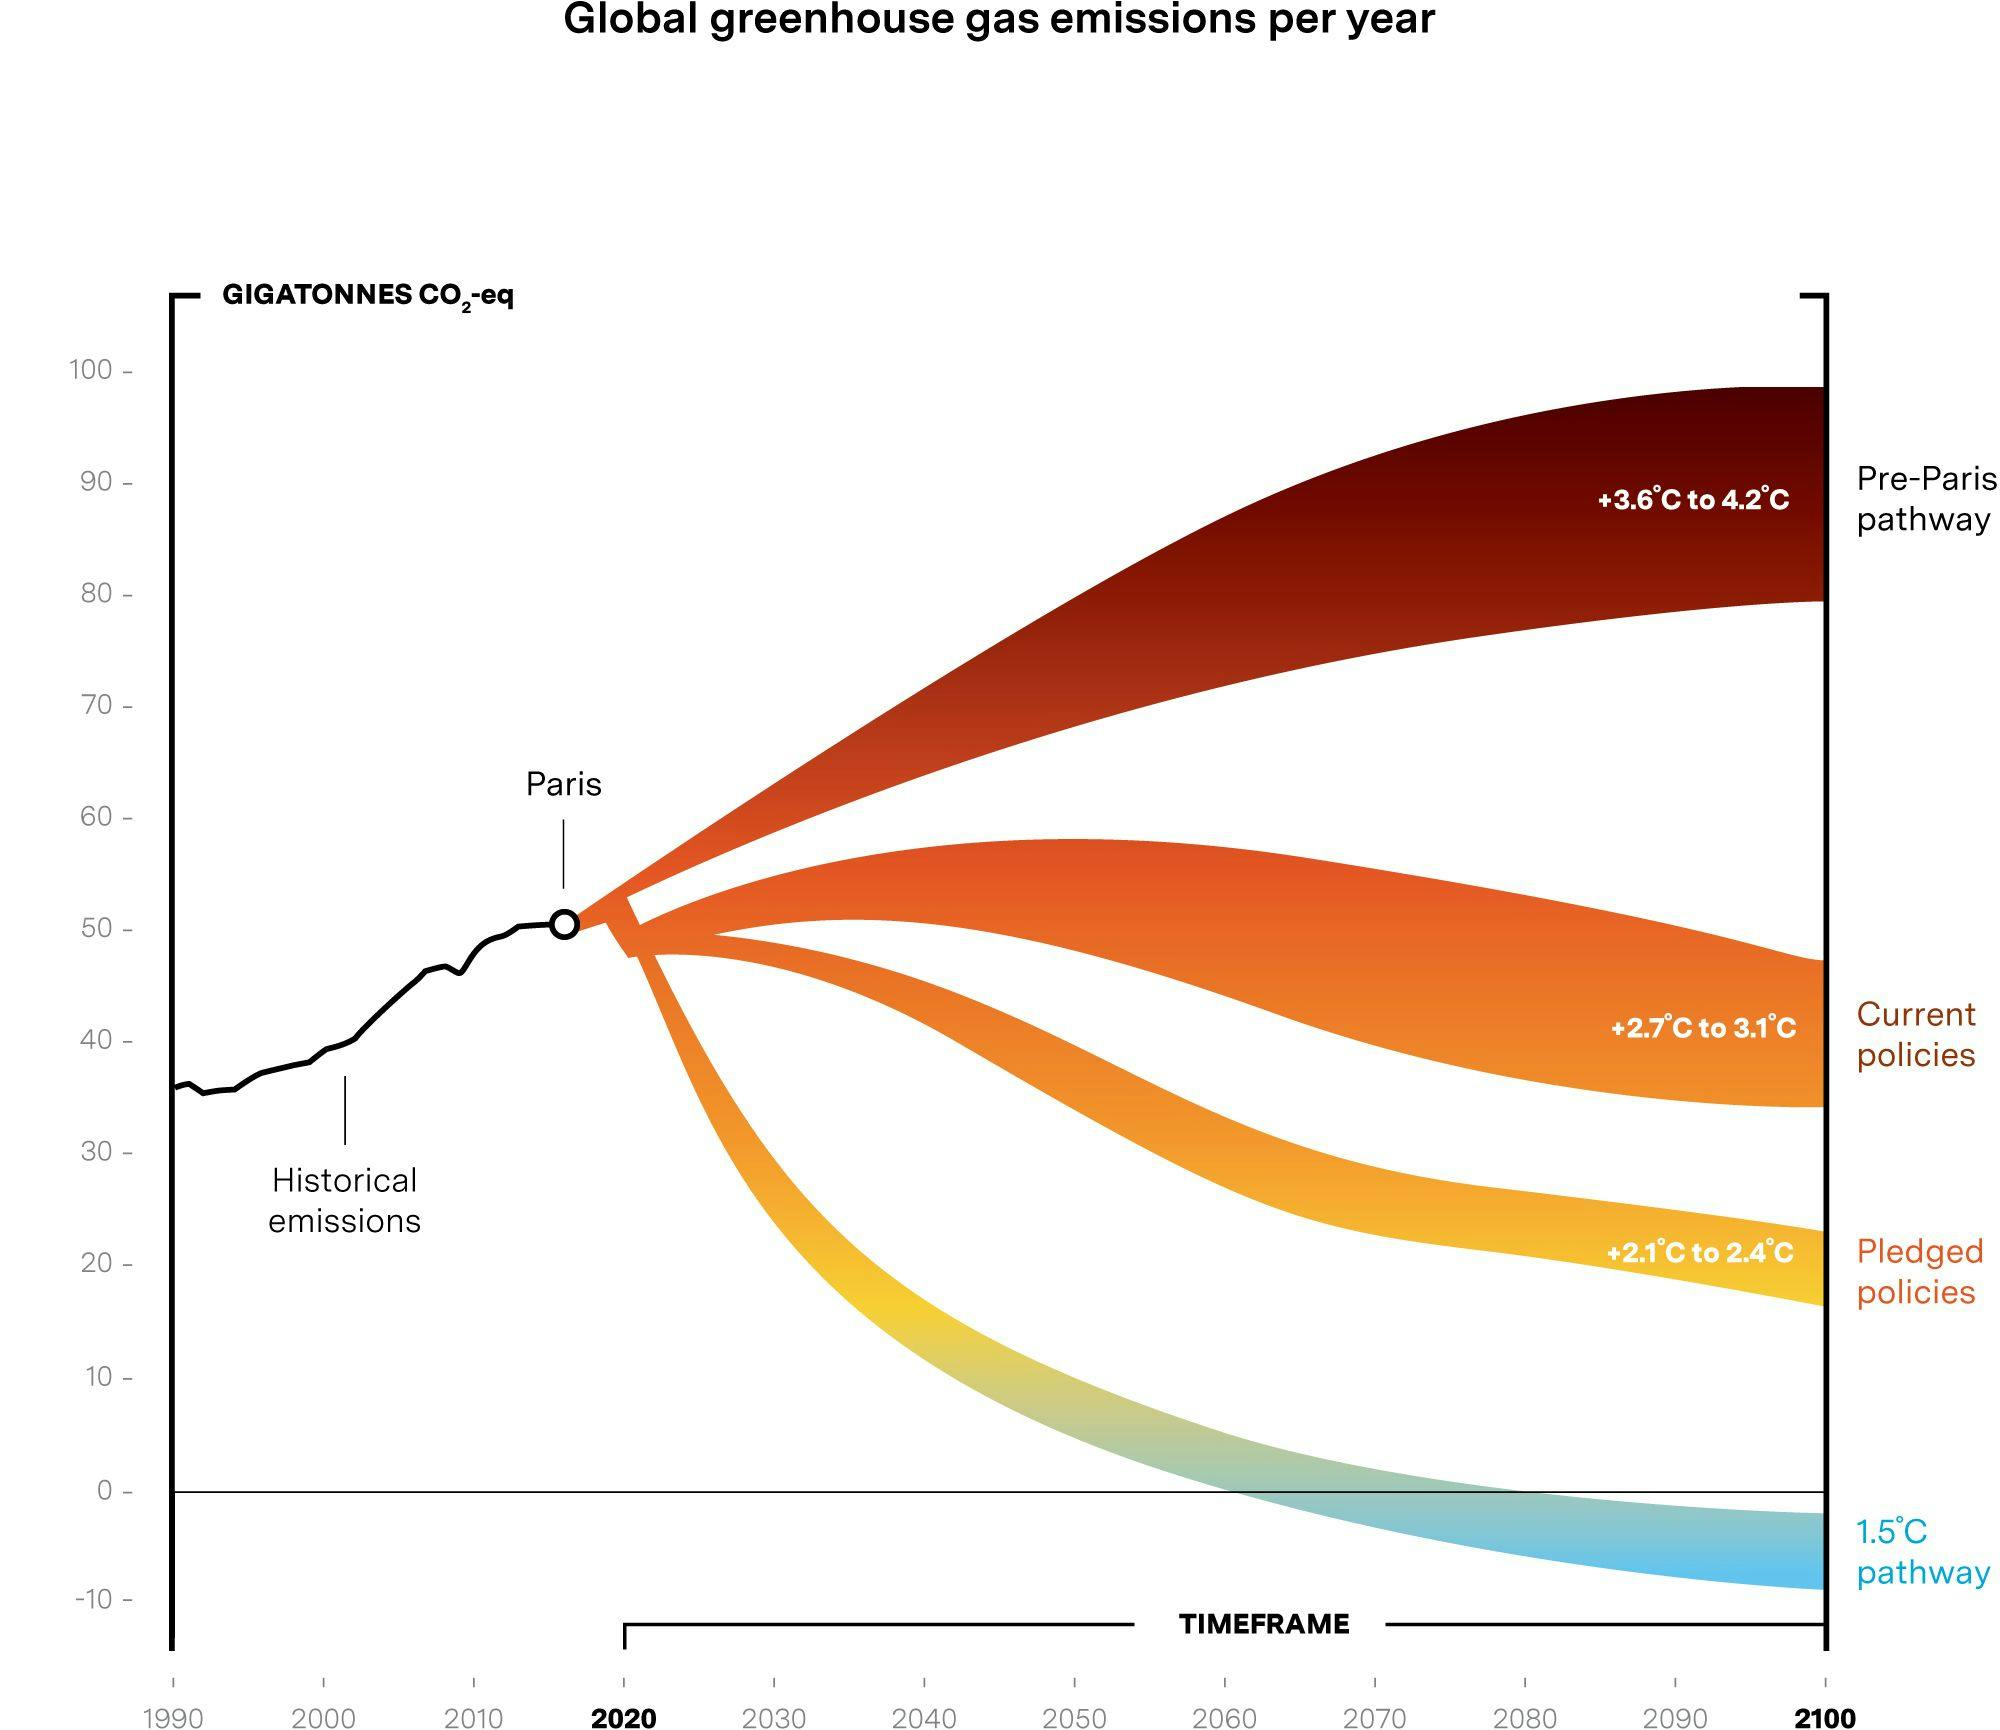 Diverging pathways for global greenhouse gas emissions